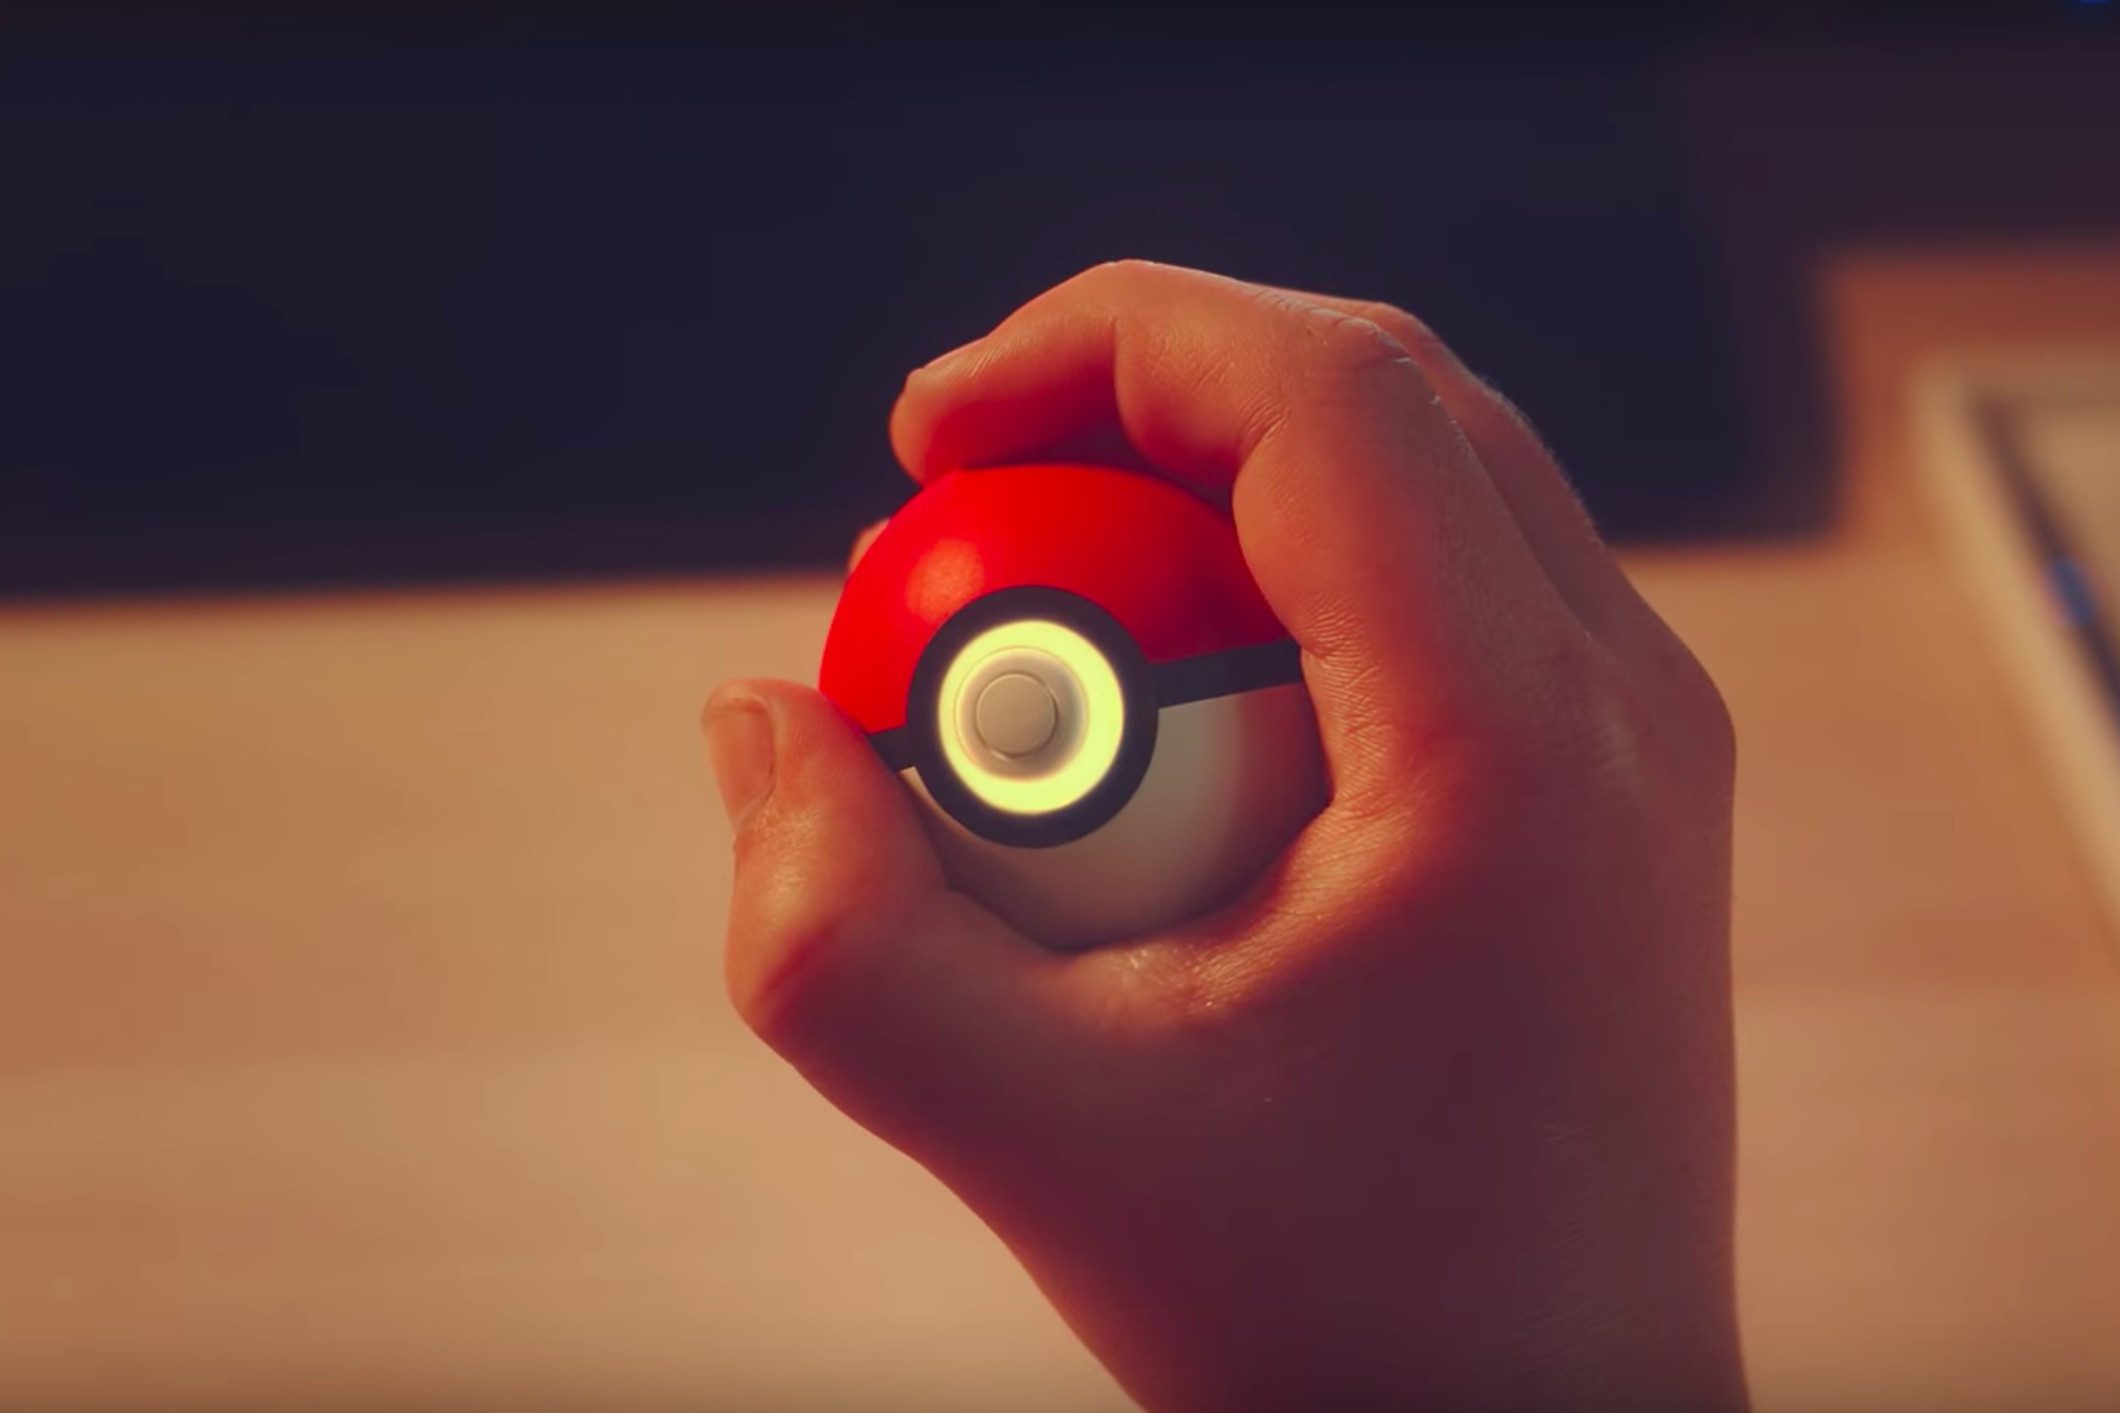 How To Make A Origami Pokeball That Opens Meet The Pokball Plus A New Tool For Aspiring Trainers With